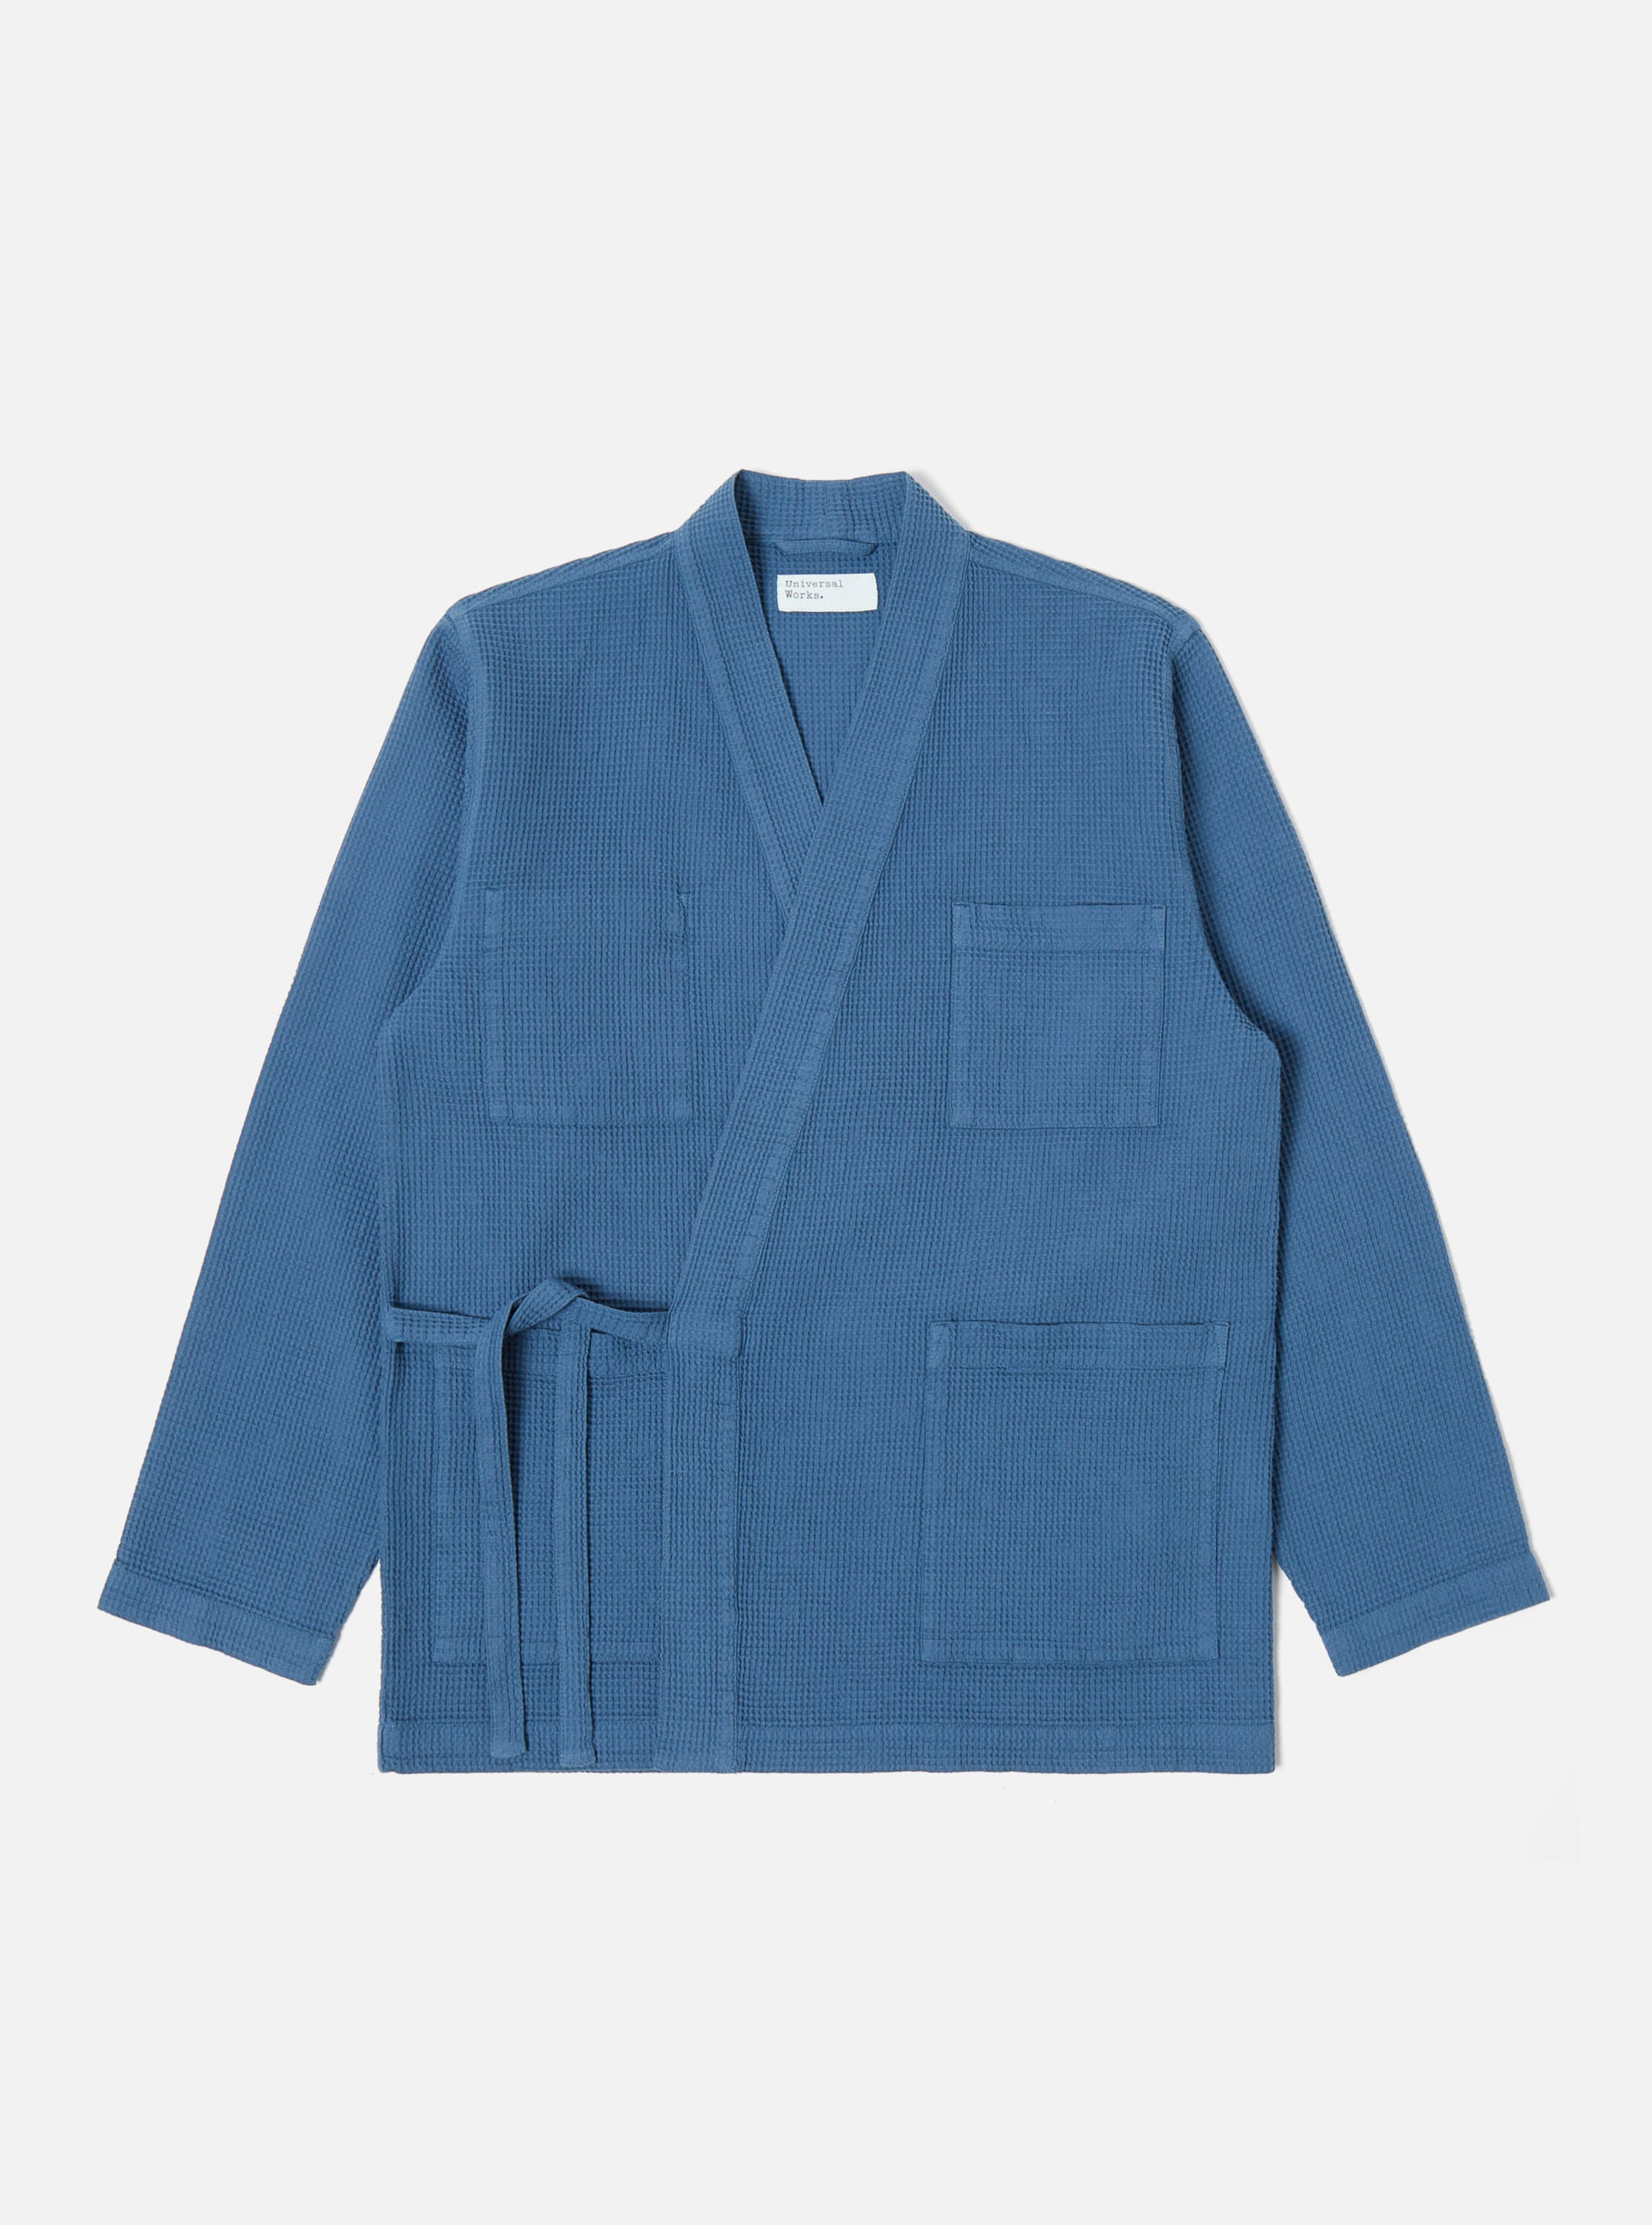 Universal Works Kyoto Work Jacket in Faded Blue Japanese Waffle